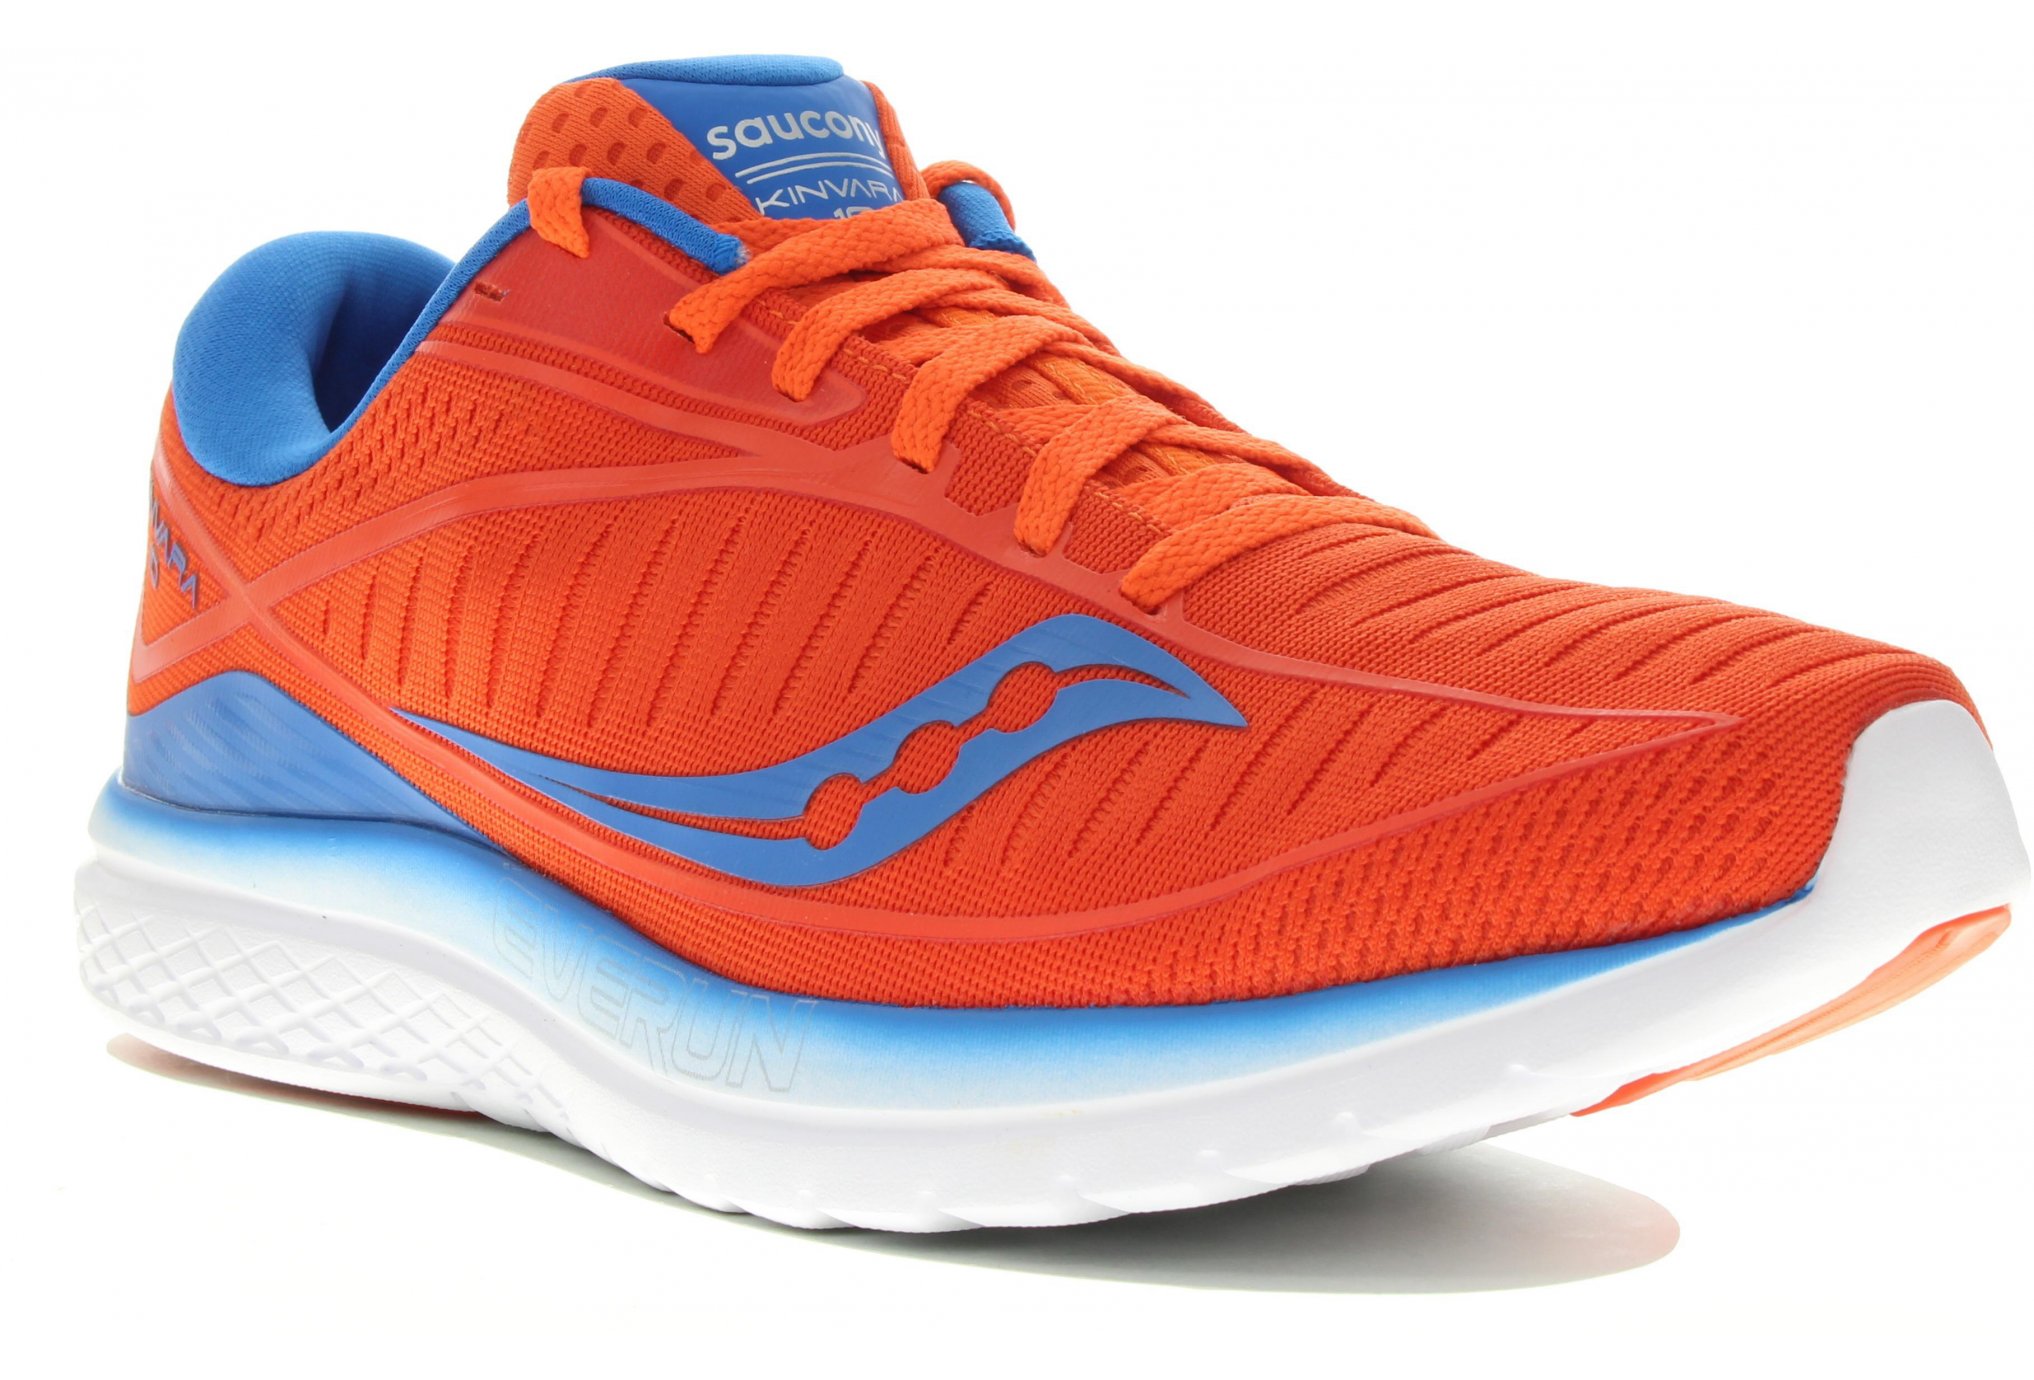 saucony chaussures femme 2019